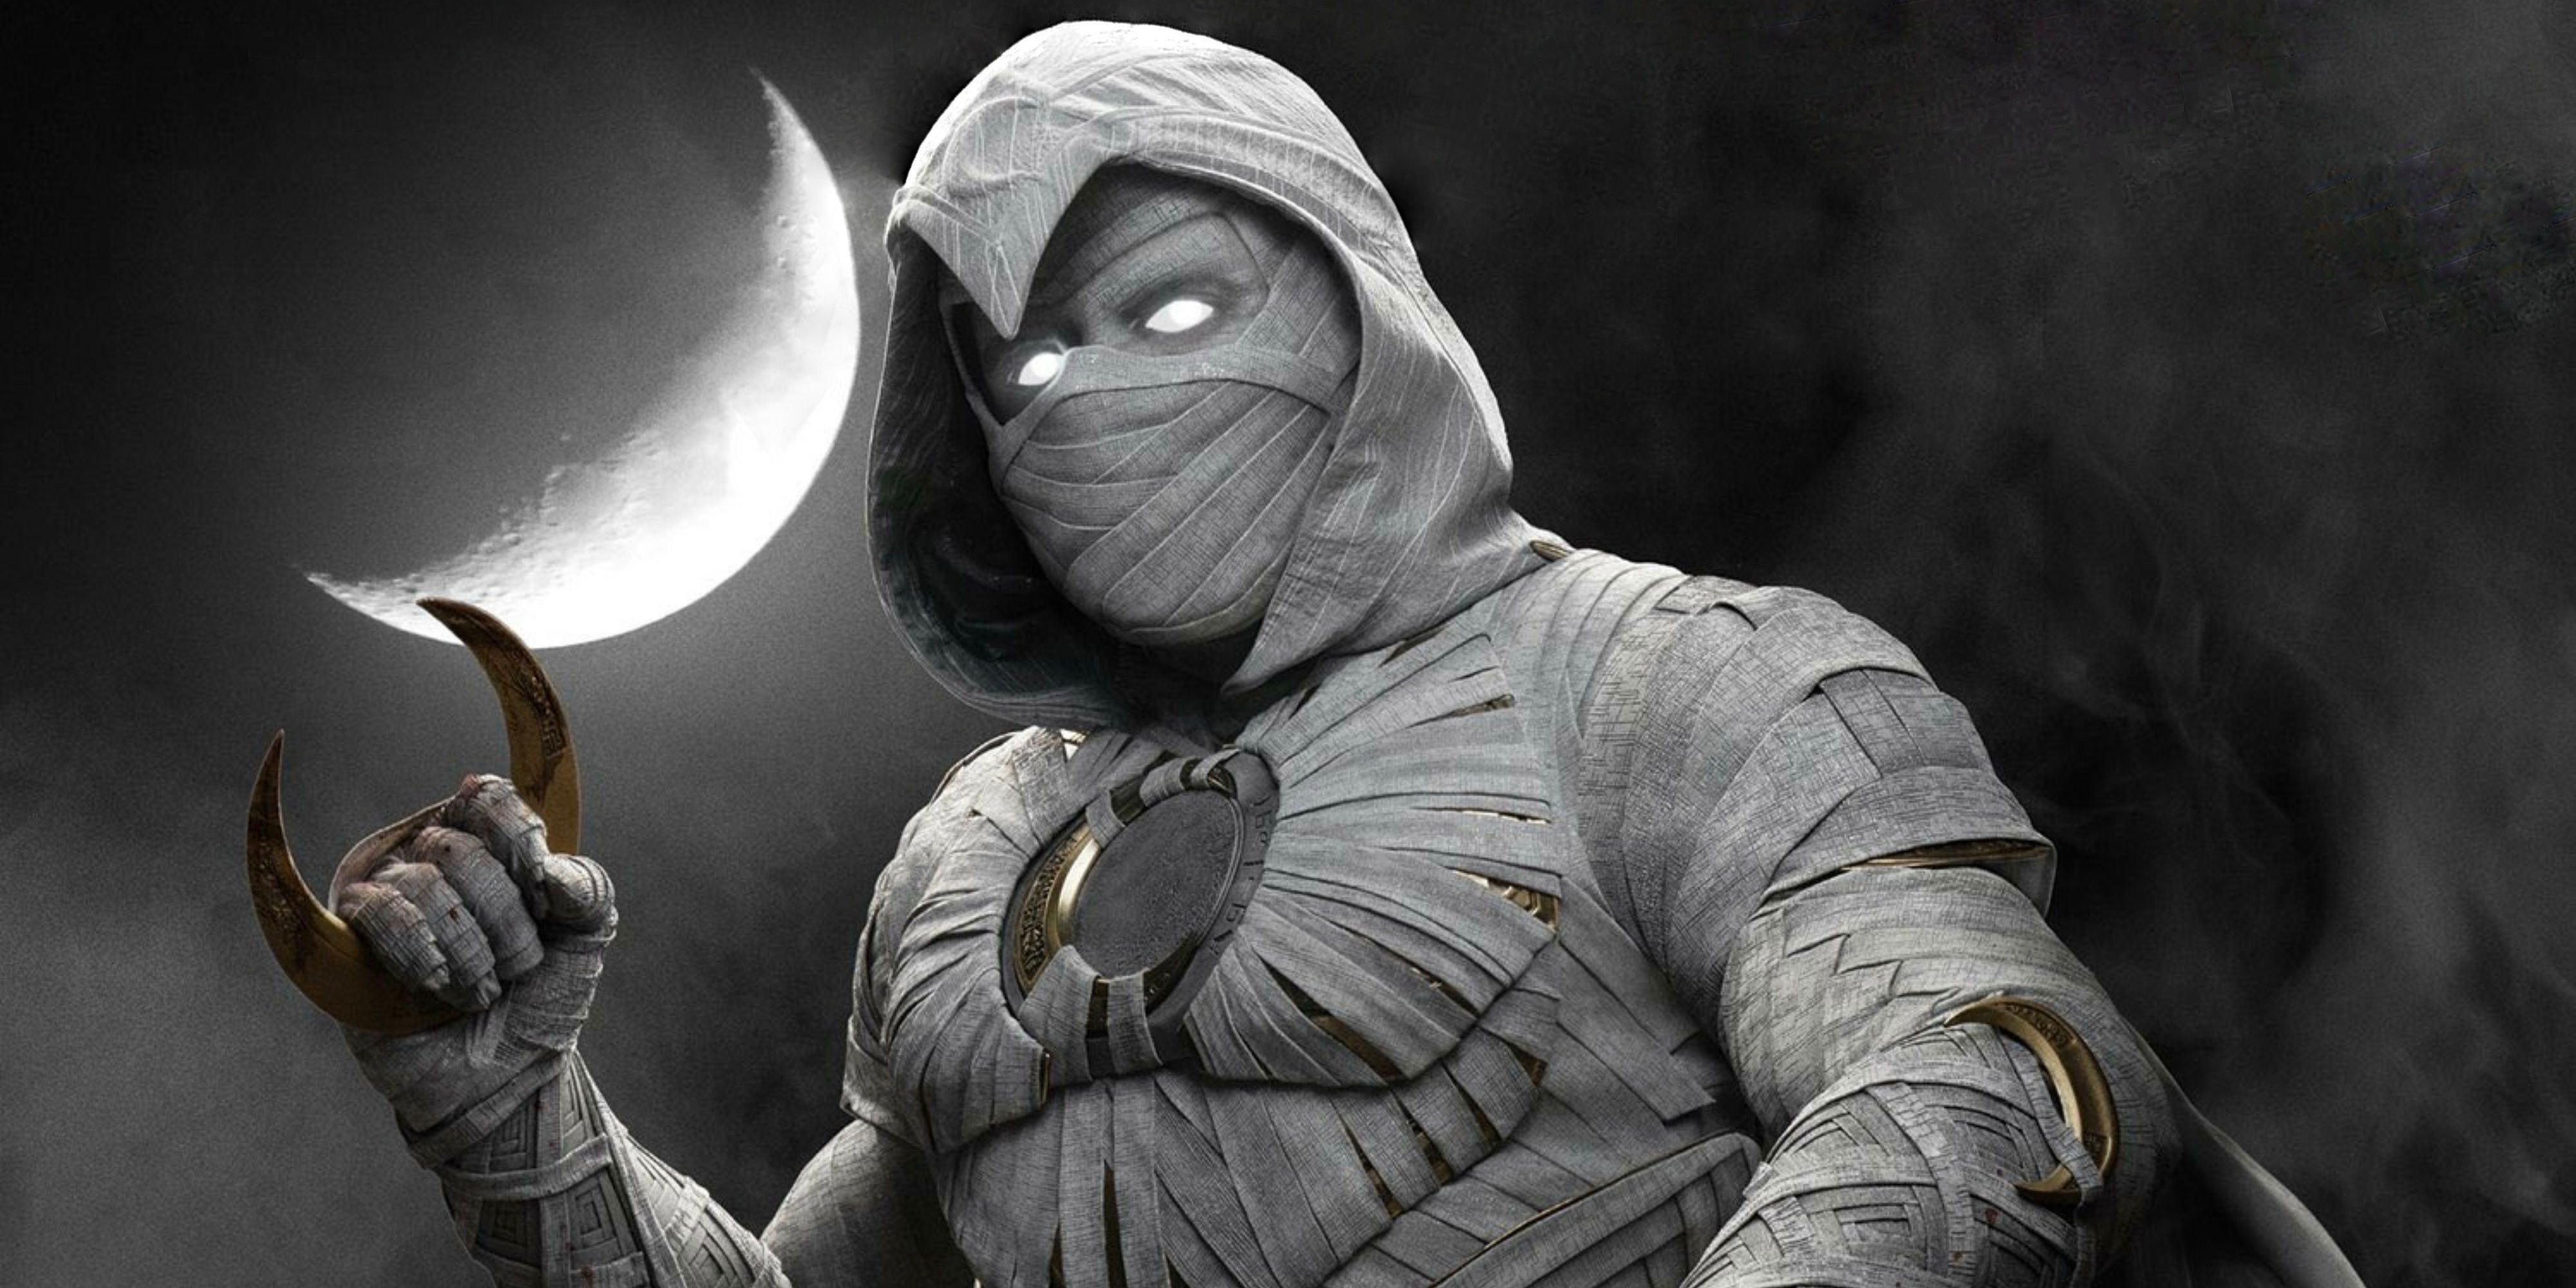 Moon Knight stands in front of a cloudy sky with a crescent moon.